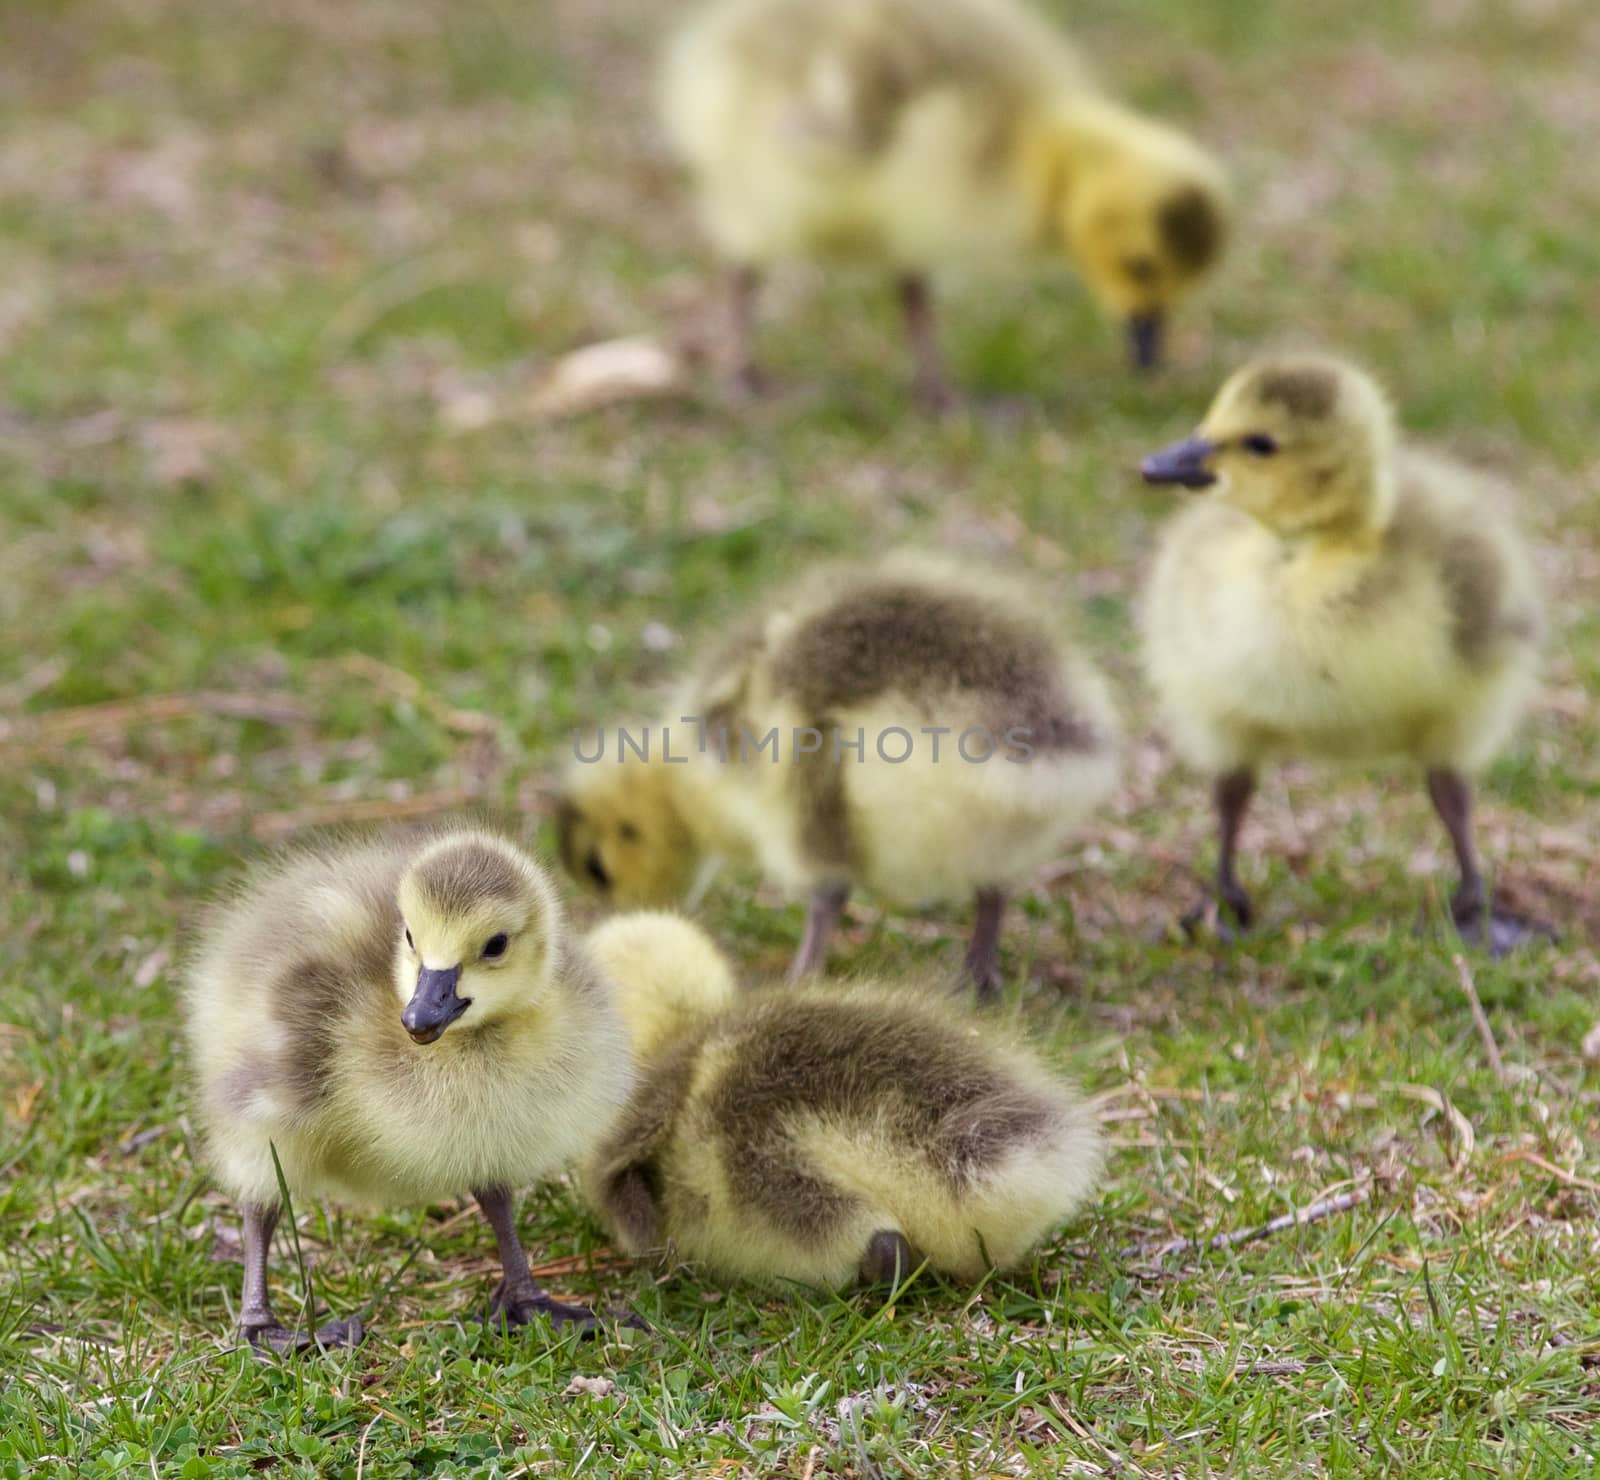 Beautiful background with a group of chicks together on the grass field by teo